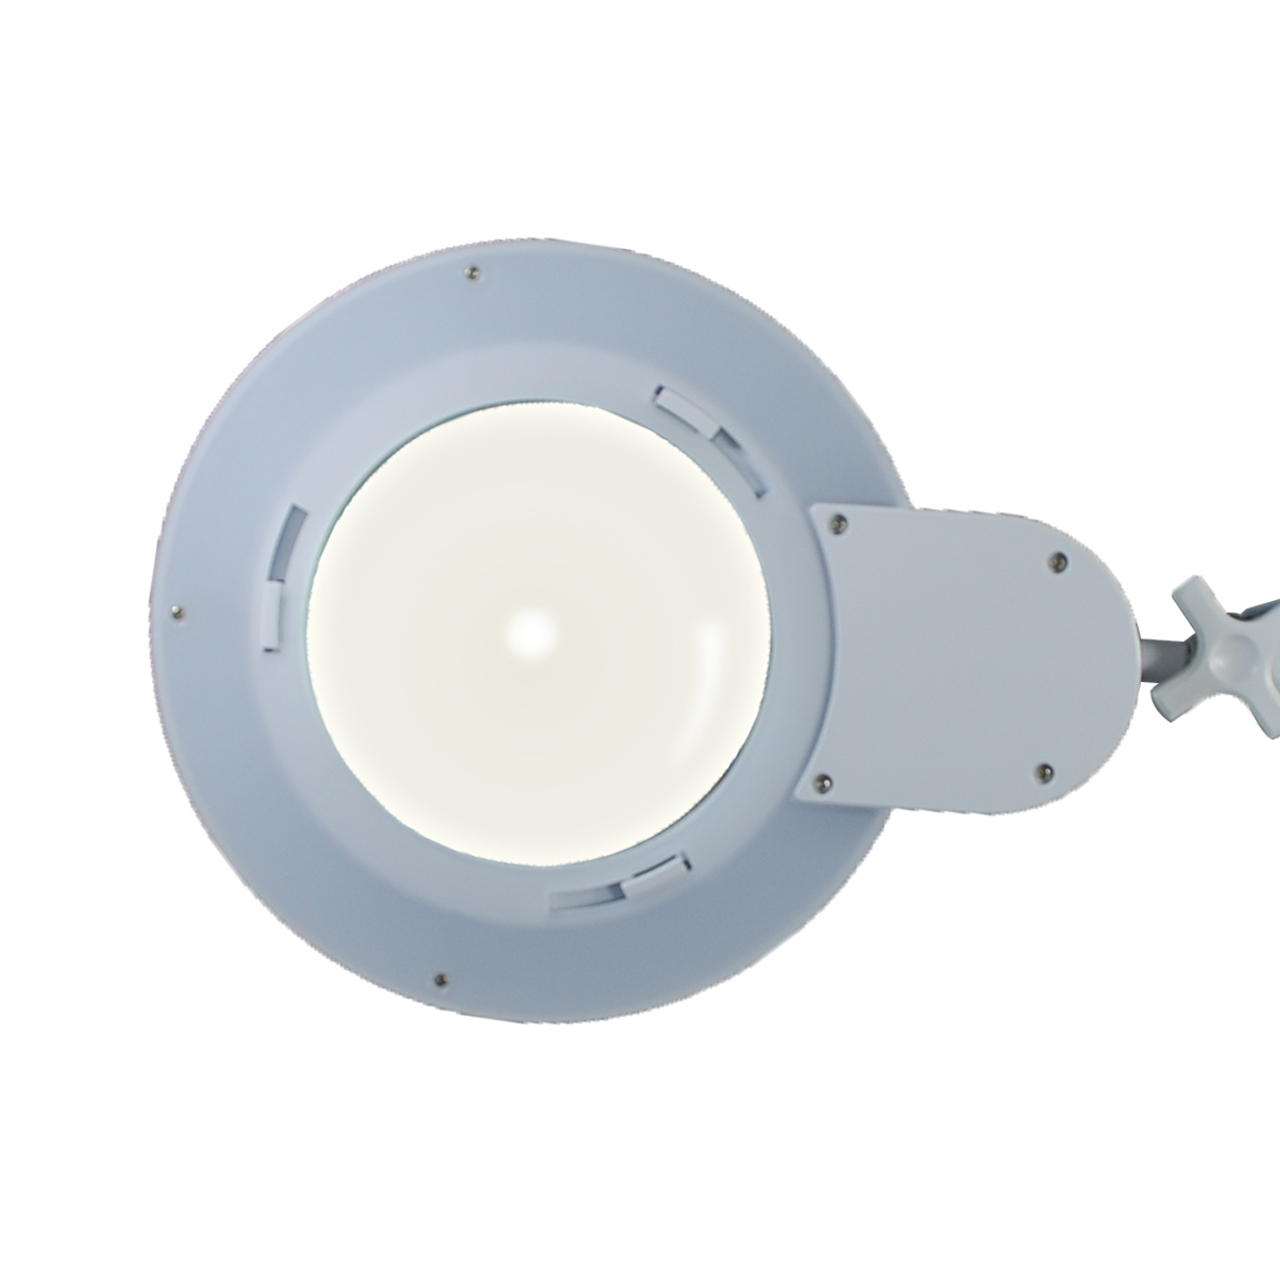 LED Magnifying Lamp - 5 Diopter 5 Diameter Lens – Beautequip